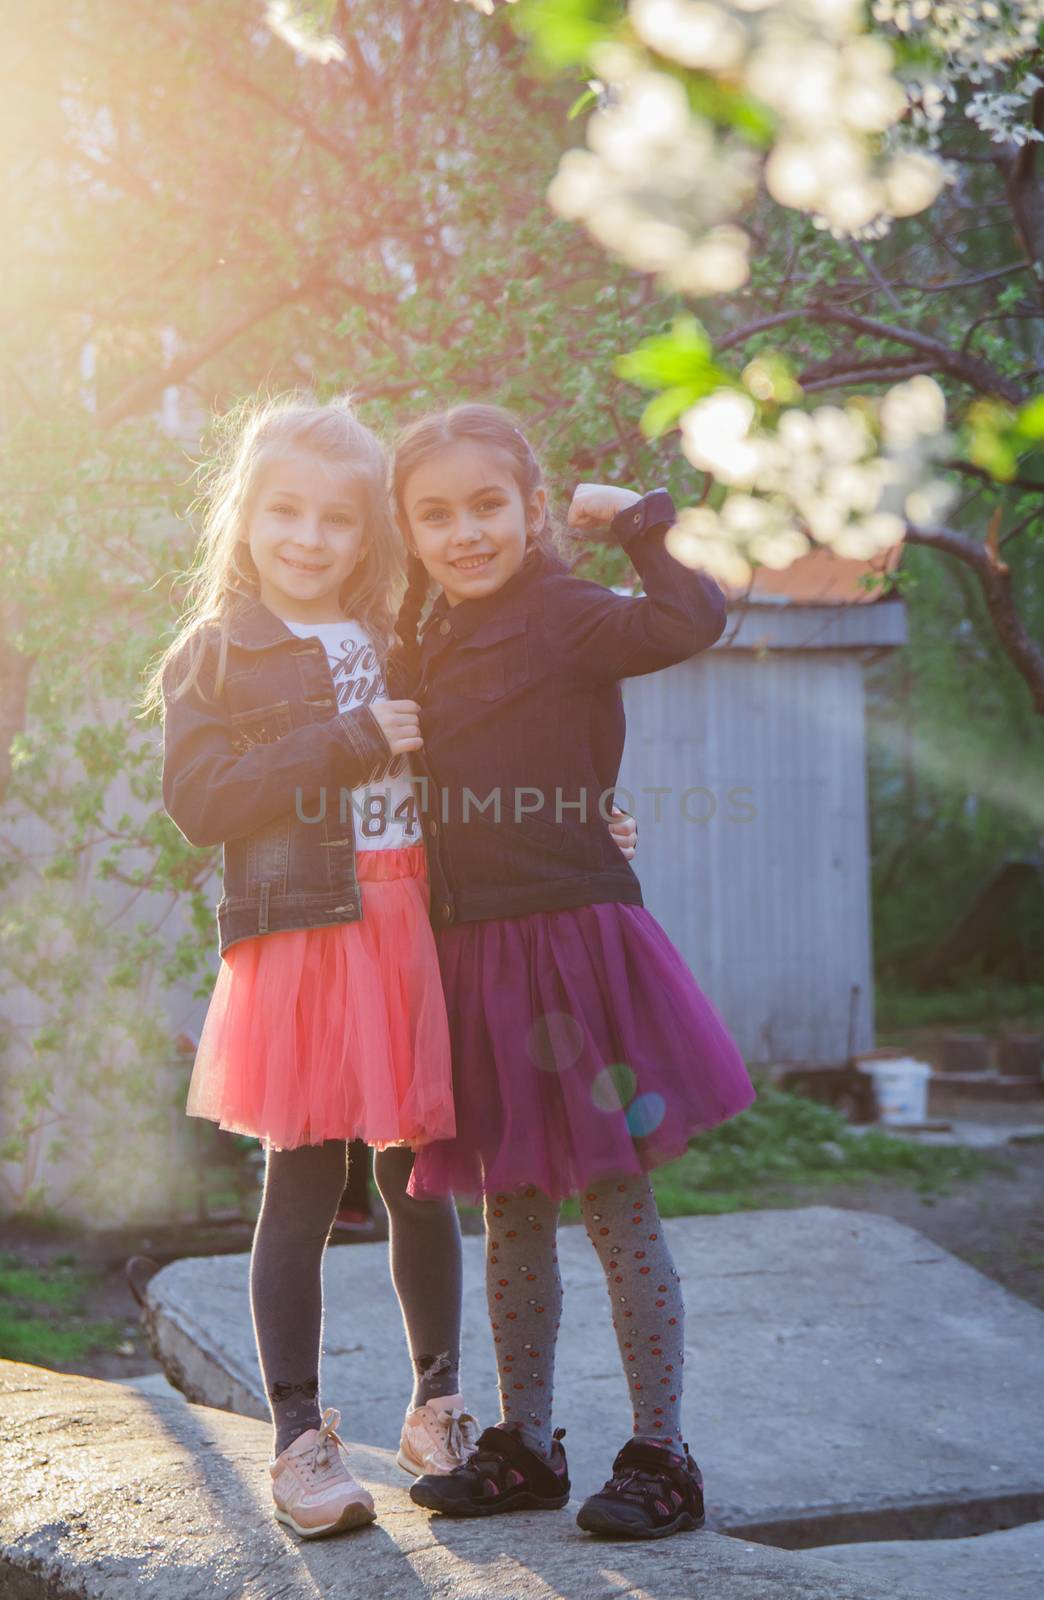 Two girls enjoying garden at sunset by Angel_a